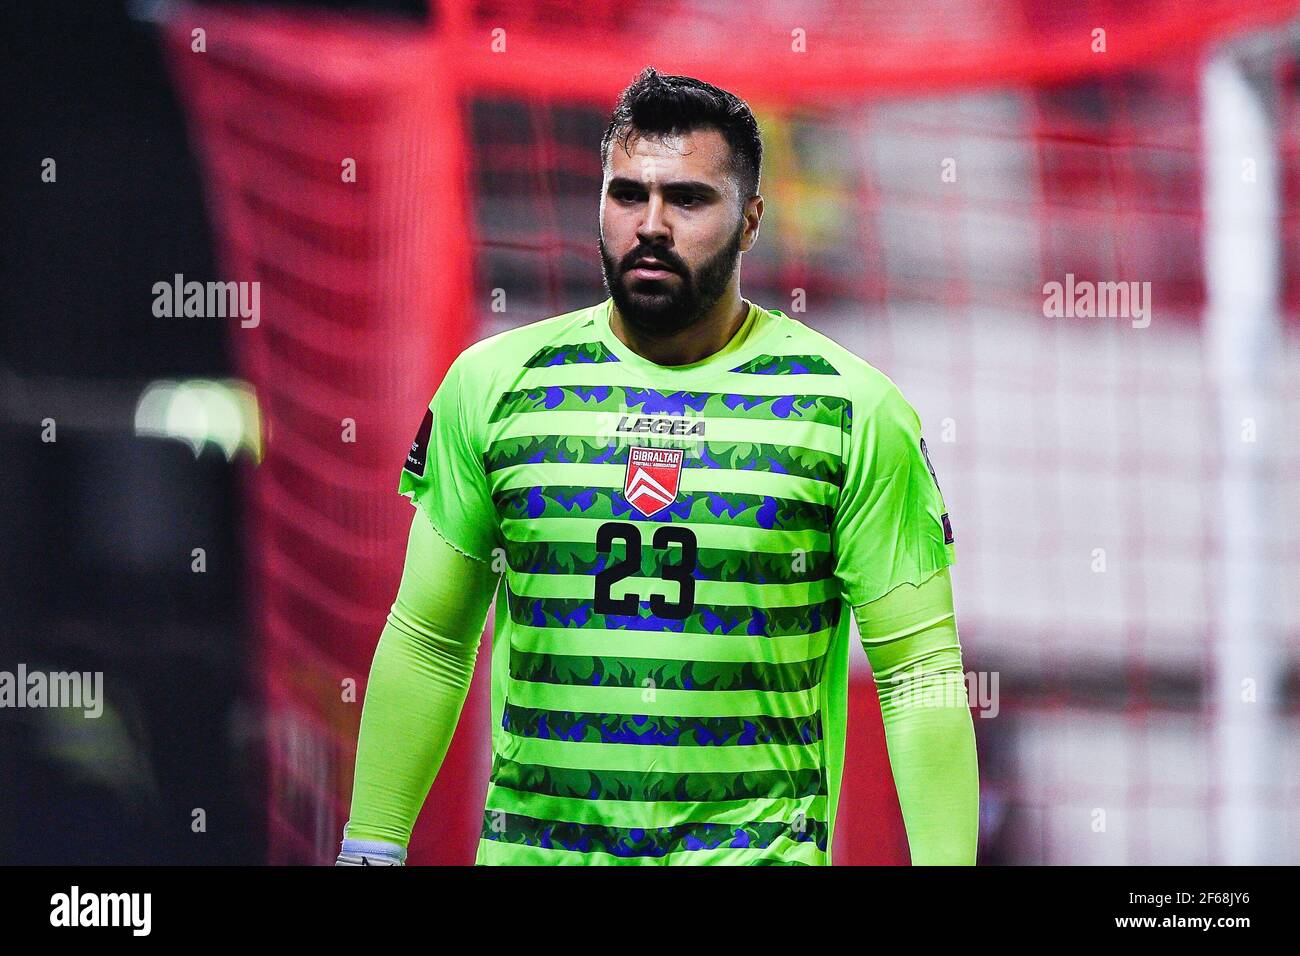 Gibraltar, Gibraltar. 30th Mar, 2021. GIBRALTAR, GIBRALTAR - MARCH 30: Goalkeeper Dayle Coleing of Gibraltar during the FIFA World Cup 2022 Qatar Qualifier match between Gibraltar and Netherlands at Victoria Stadium on March 30, 2021 in Gibraltar, Gibraltar (Photo by Pablo Morano/Orange Pictures) Credit: Orange Pics BV/Alamy Live News Stock Photo